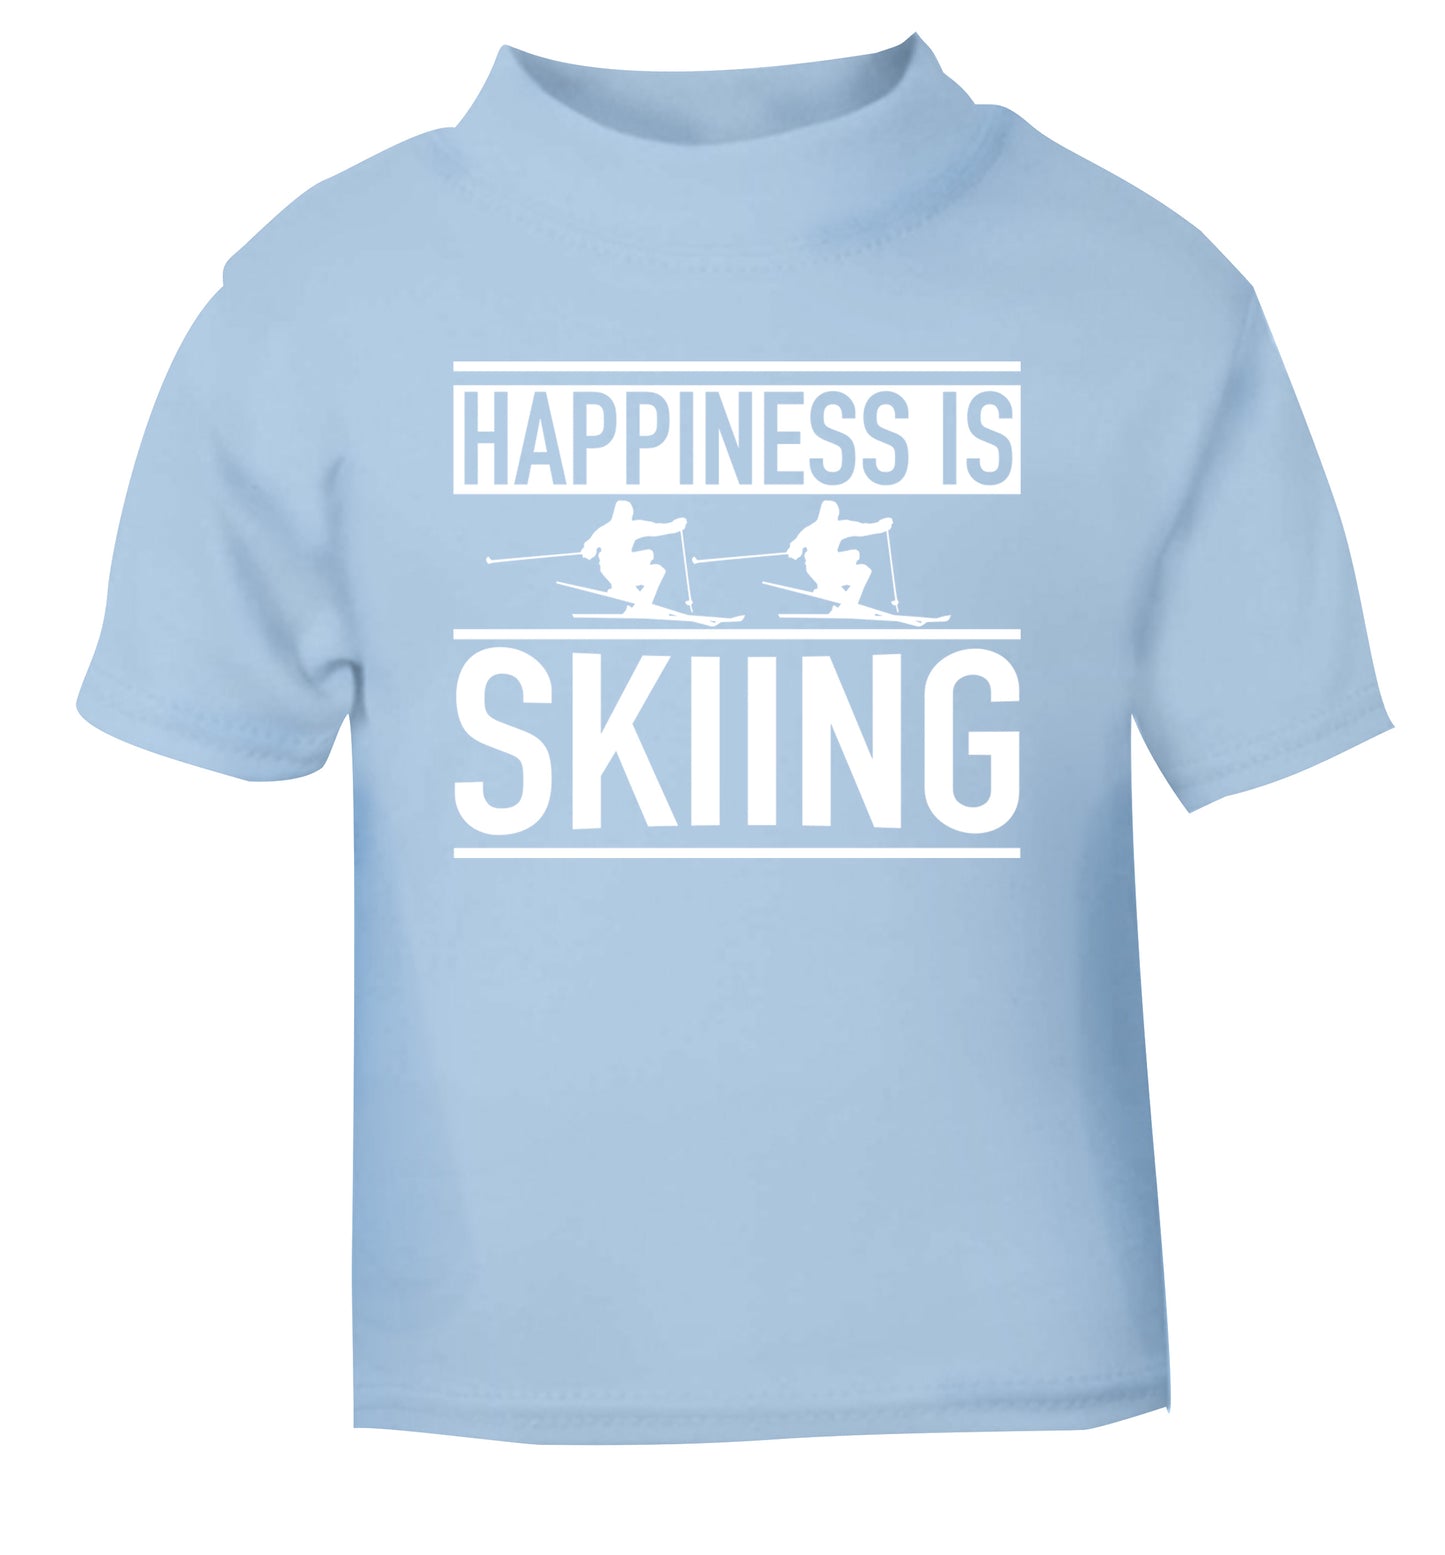 Happiness is skiing light blue Baby Toddler Tshirt 2 Years